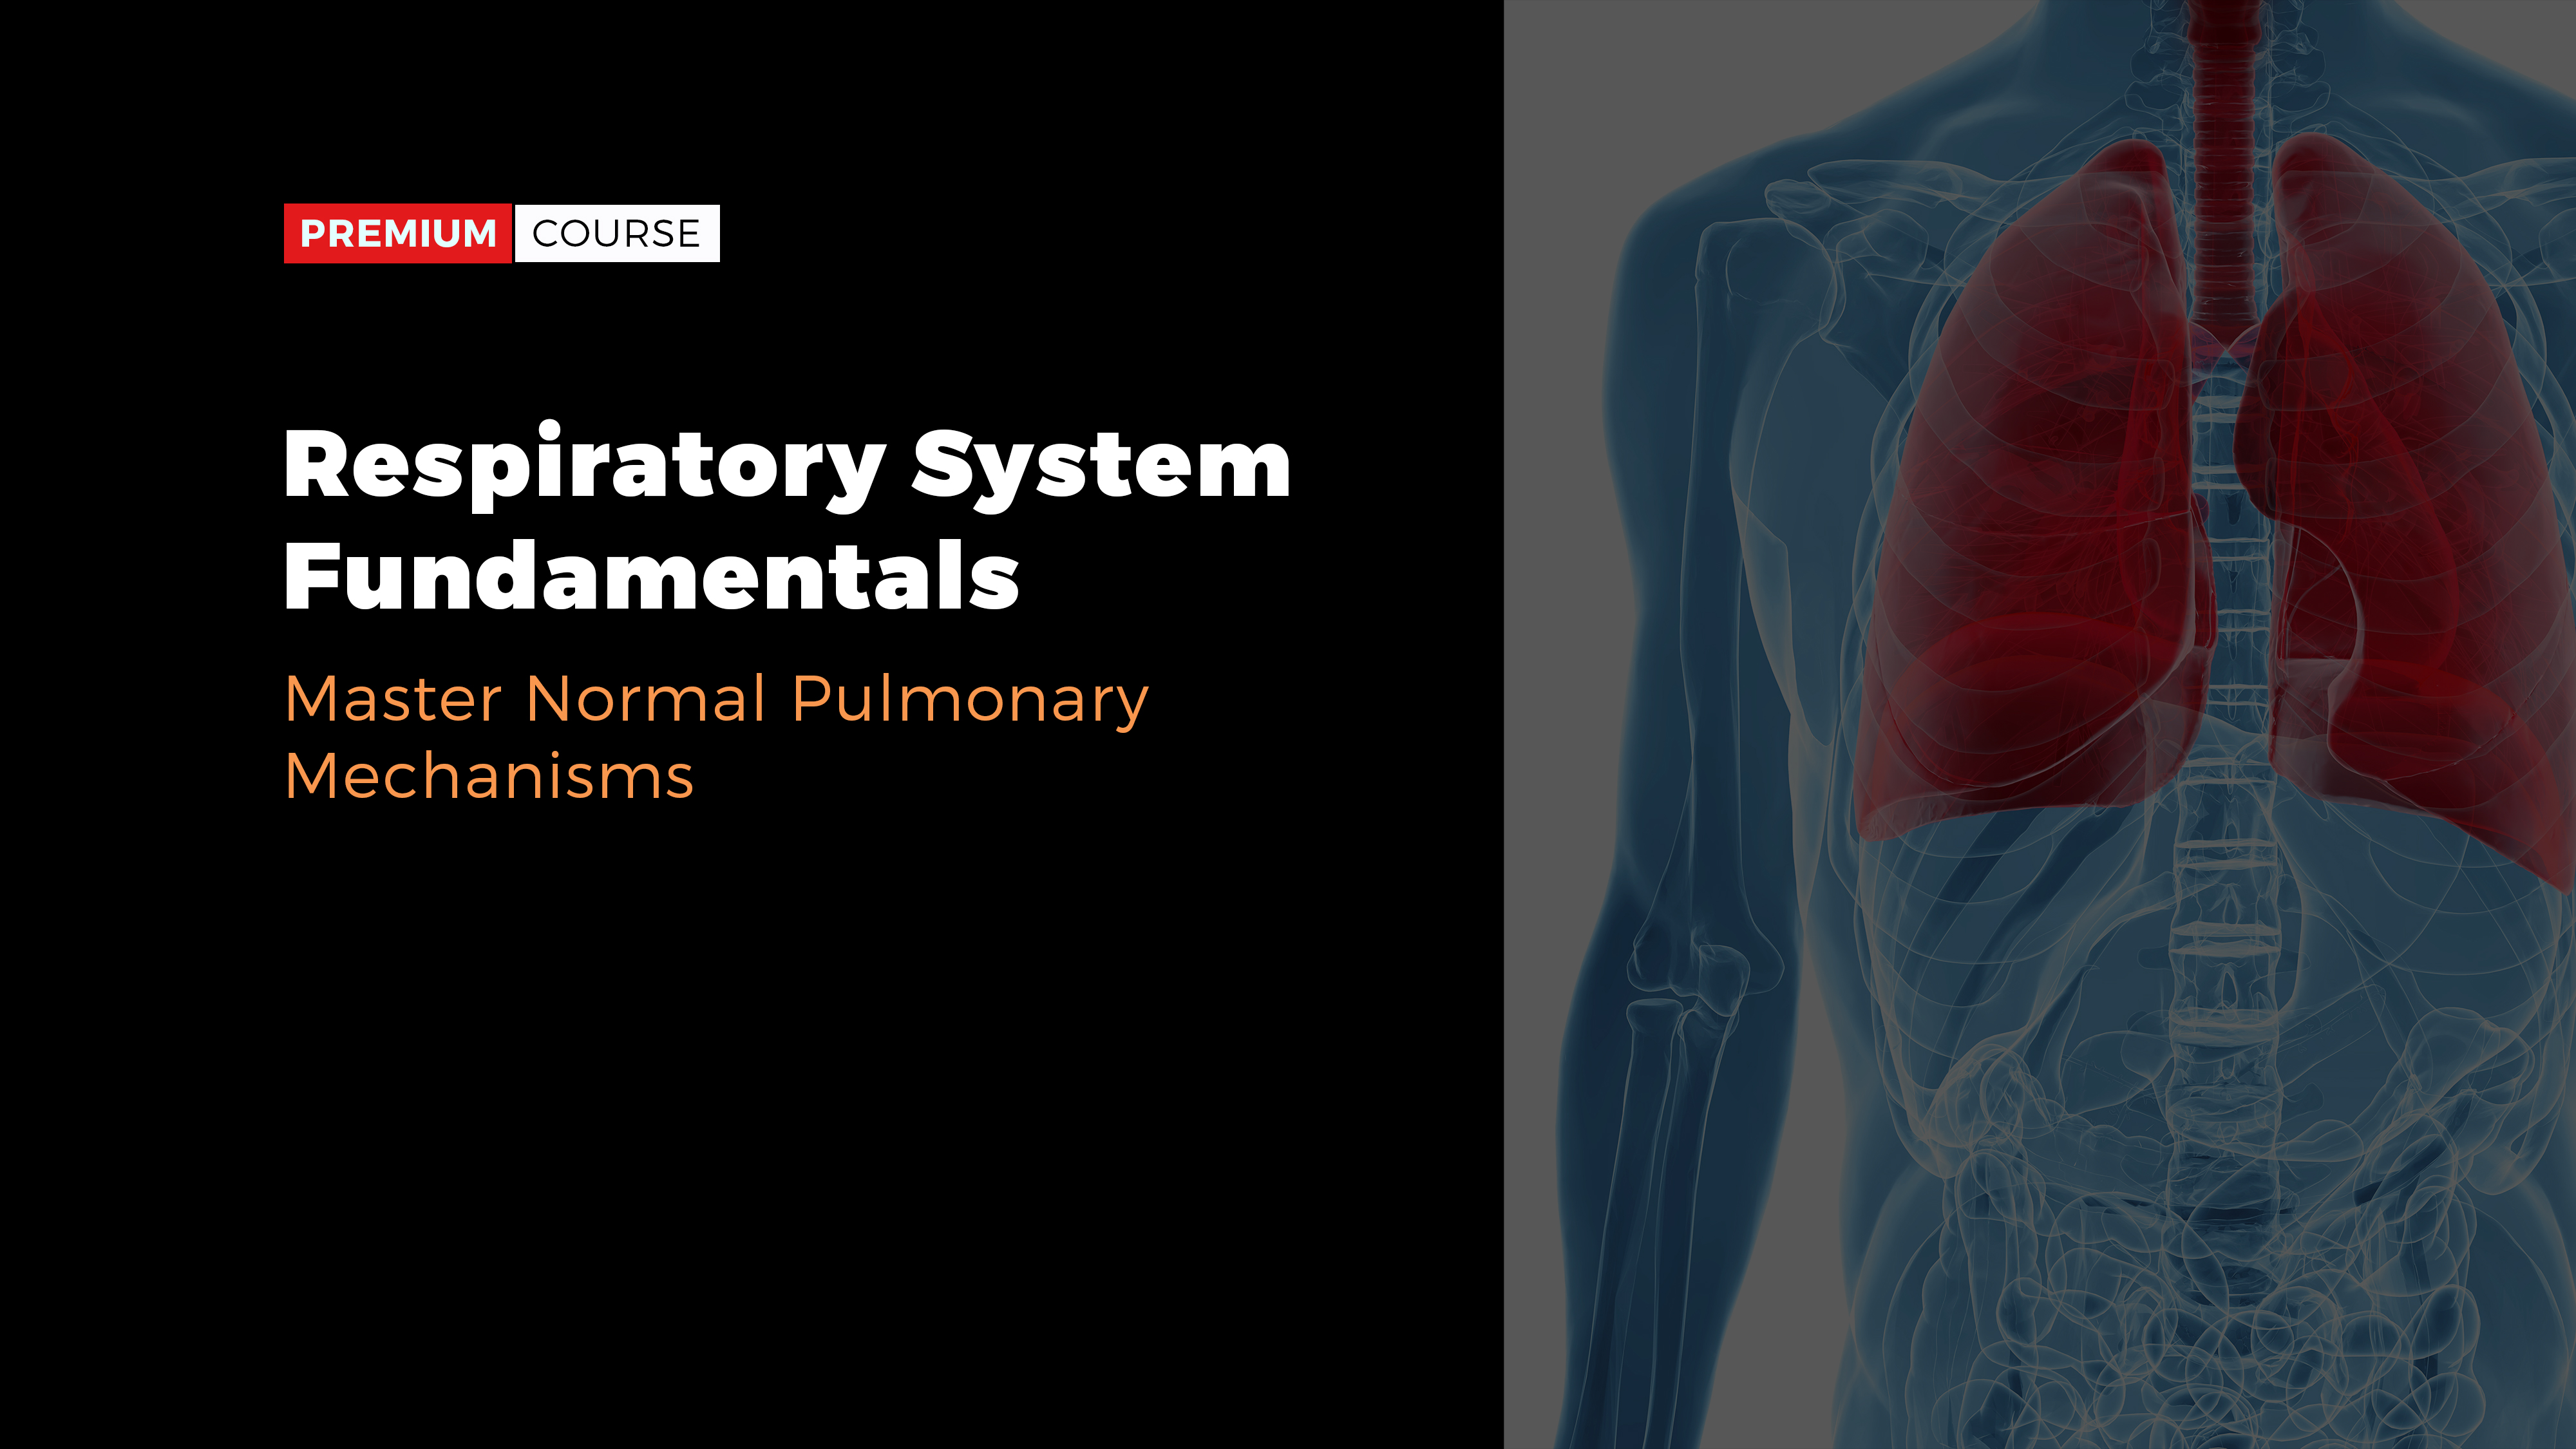 what portions of the respiratory system are referred to as anatomical dead space?